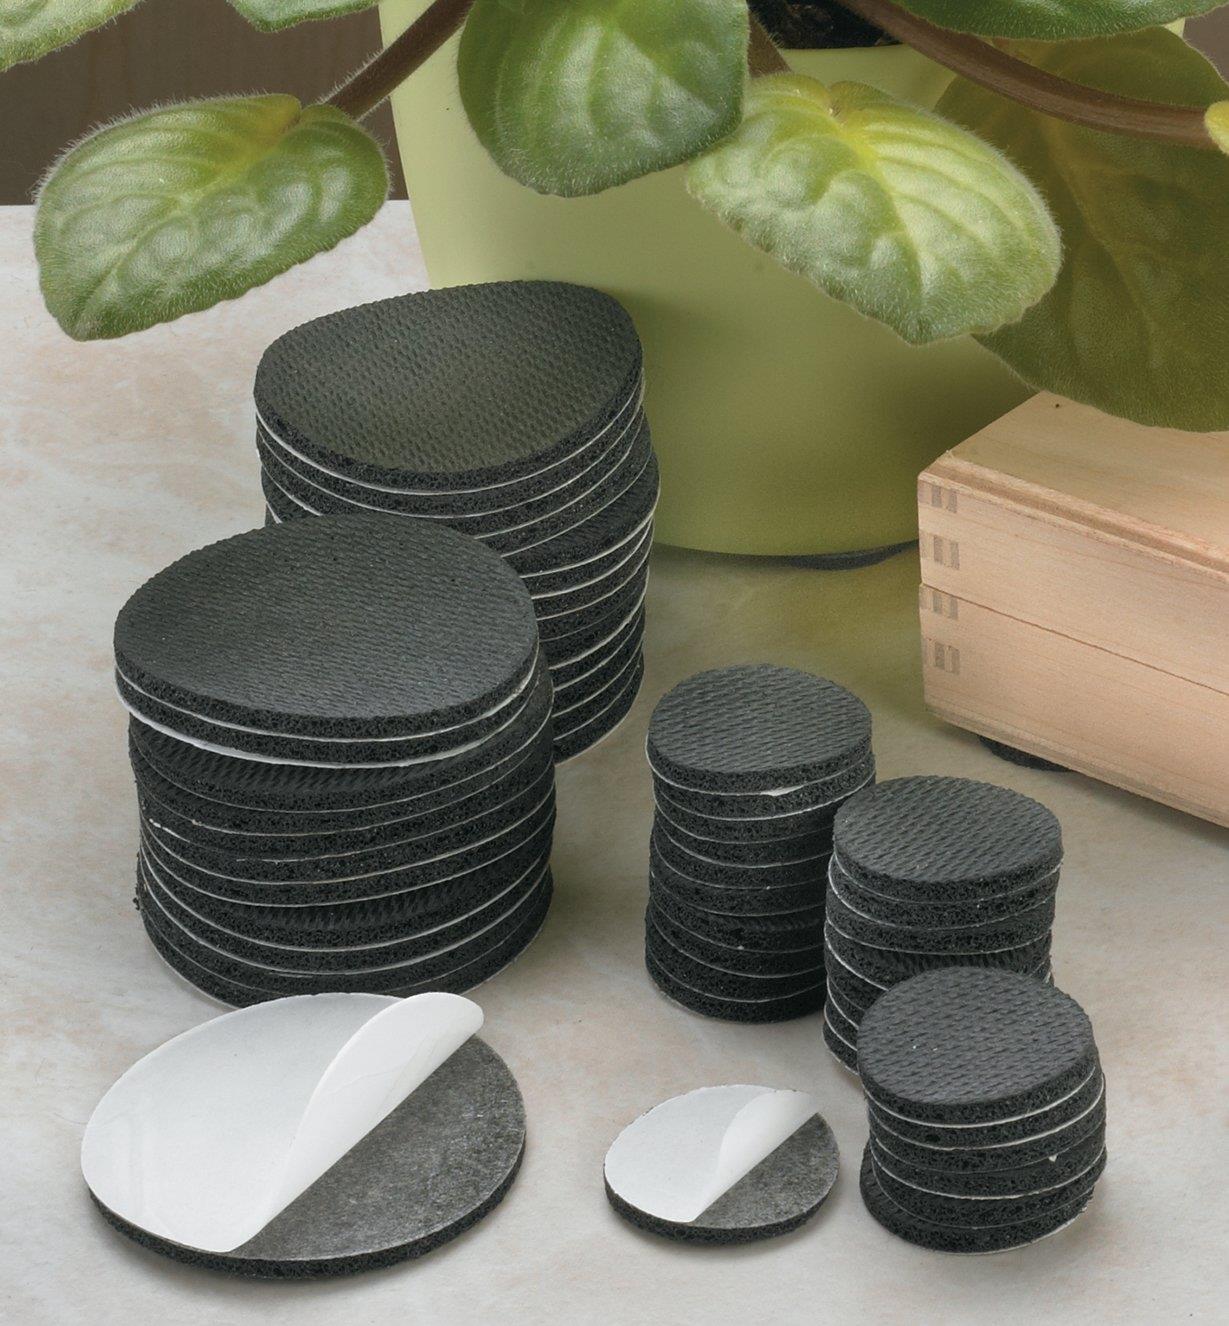 Two sizes of High-Friction Grip Discs piled beside a wooden box and a planter